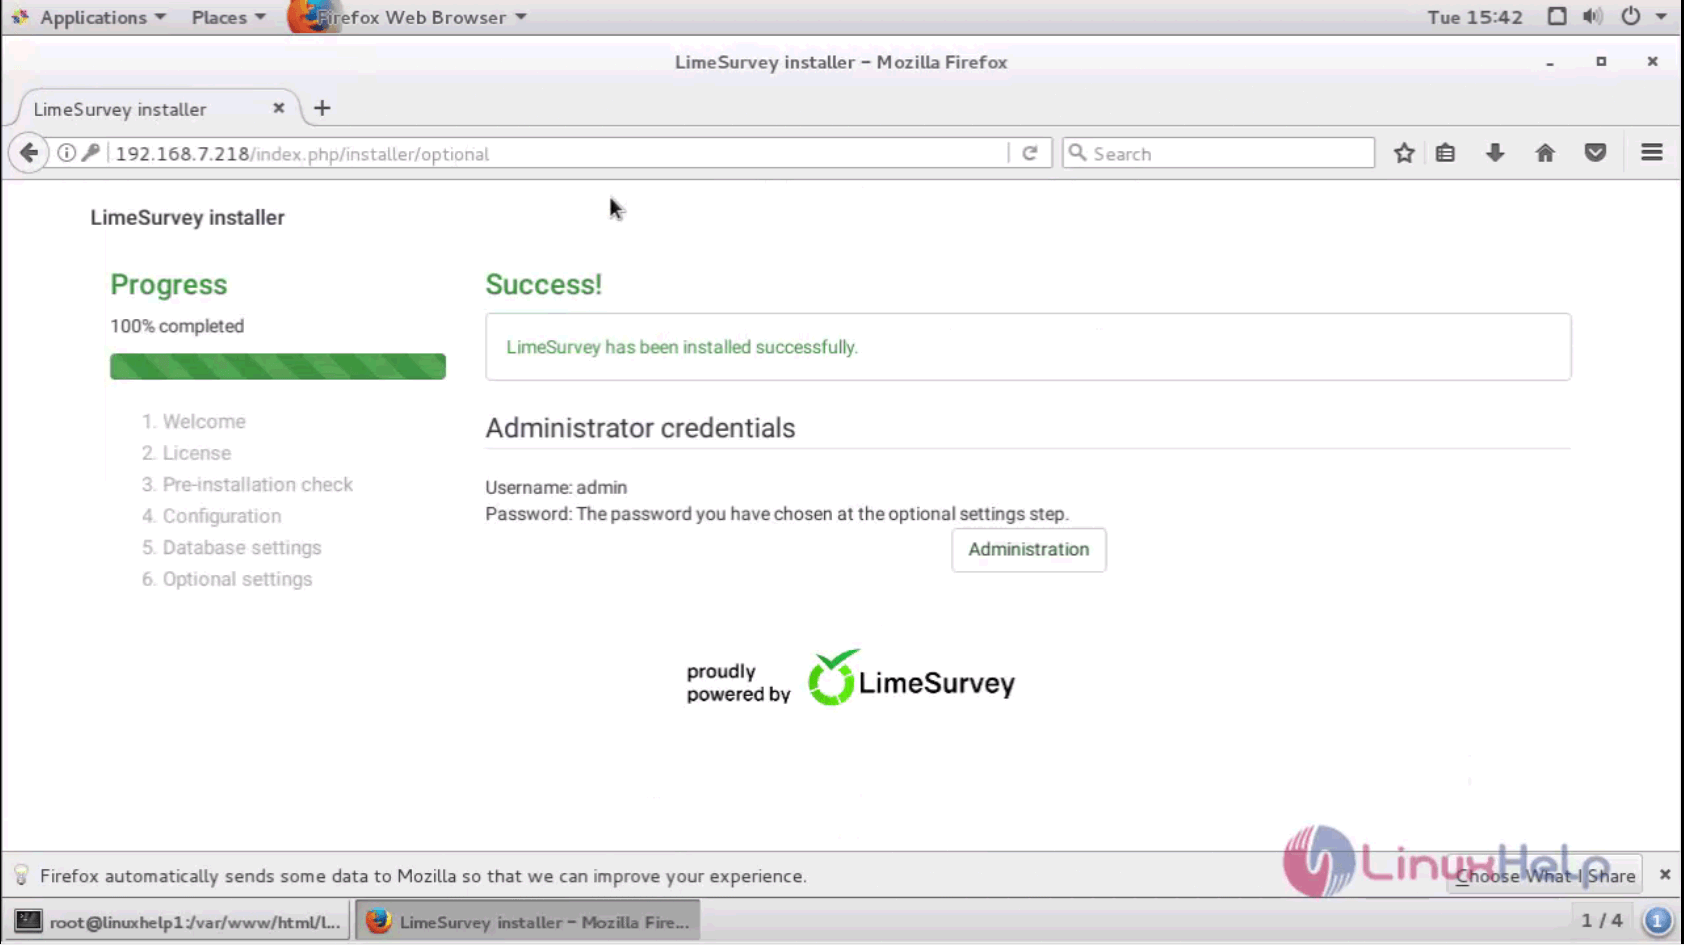 How To Install Lime Survey 2 67 3 On Centos 7 Linuxhelp Tutorials - 9